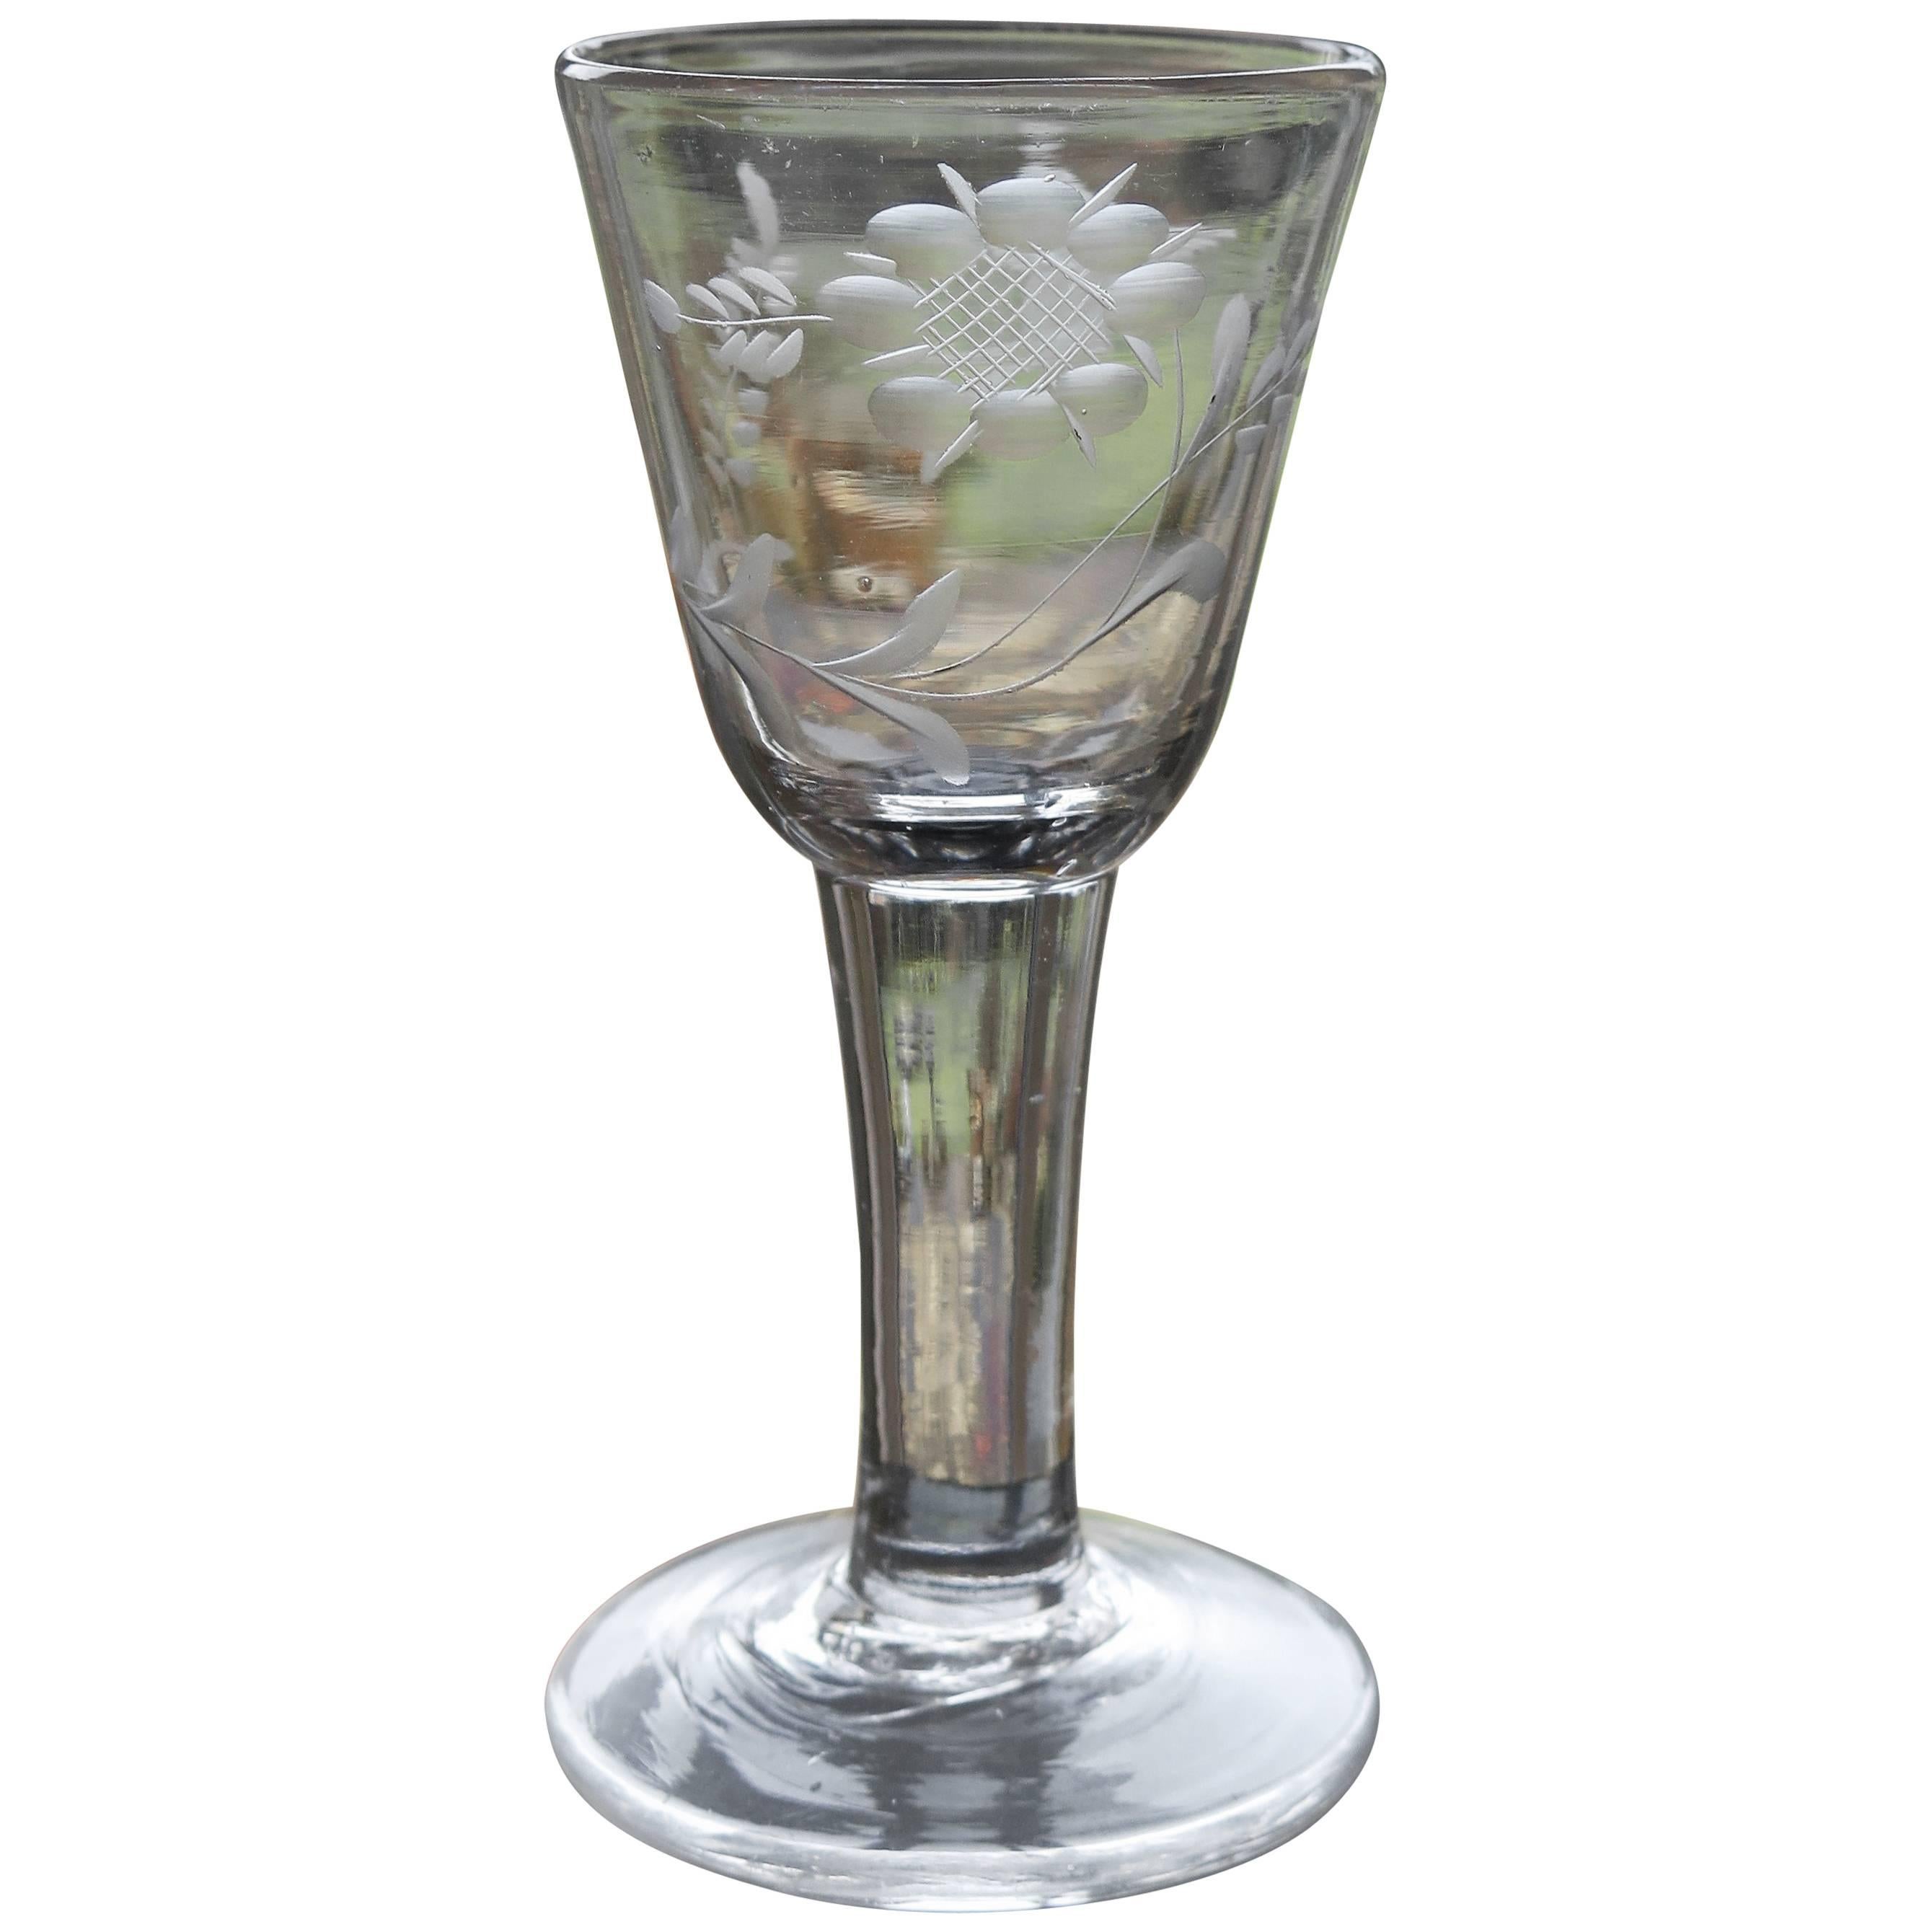 Mid-18th Century English Wine Drinking Glass Engraved Jacobite Rose, Handblown